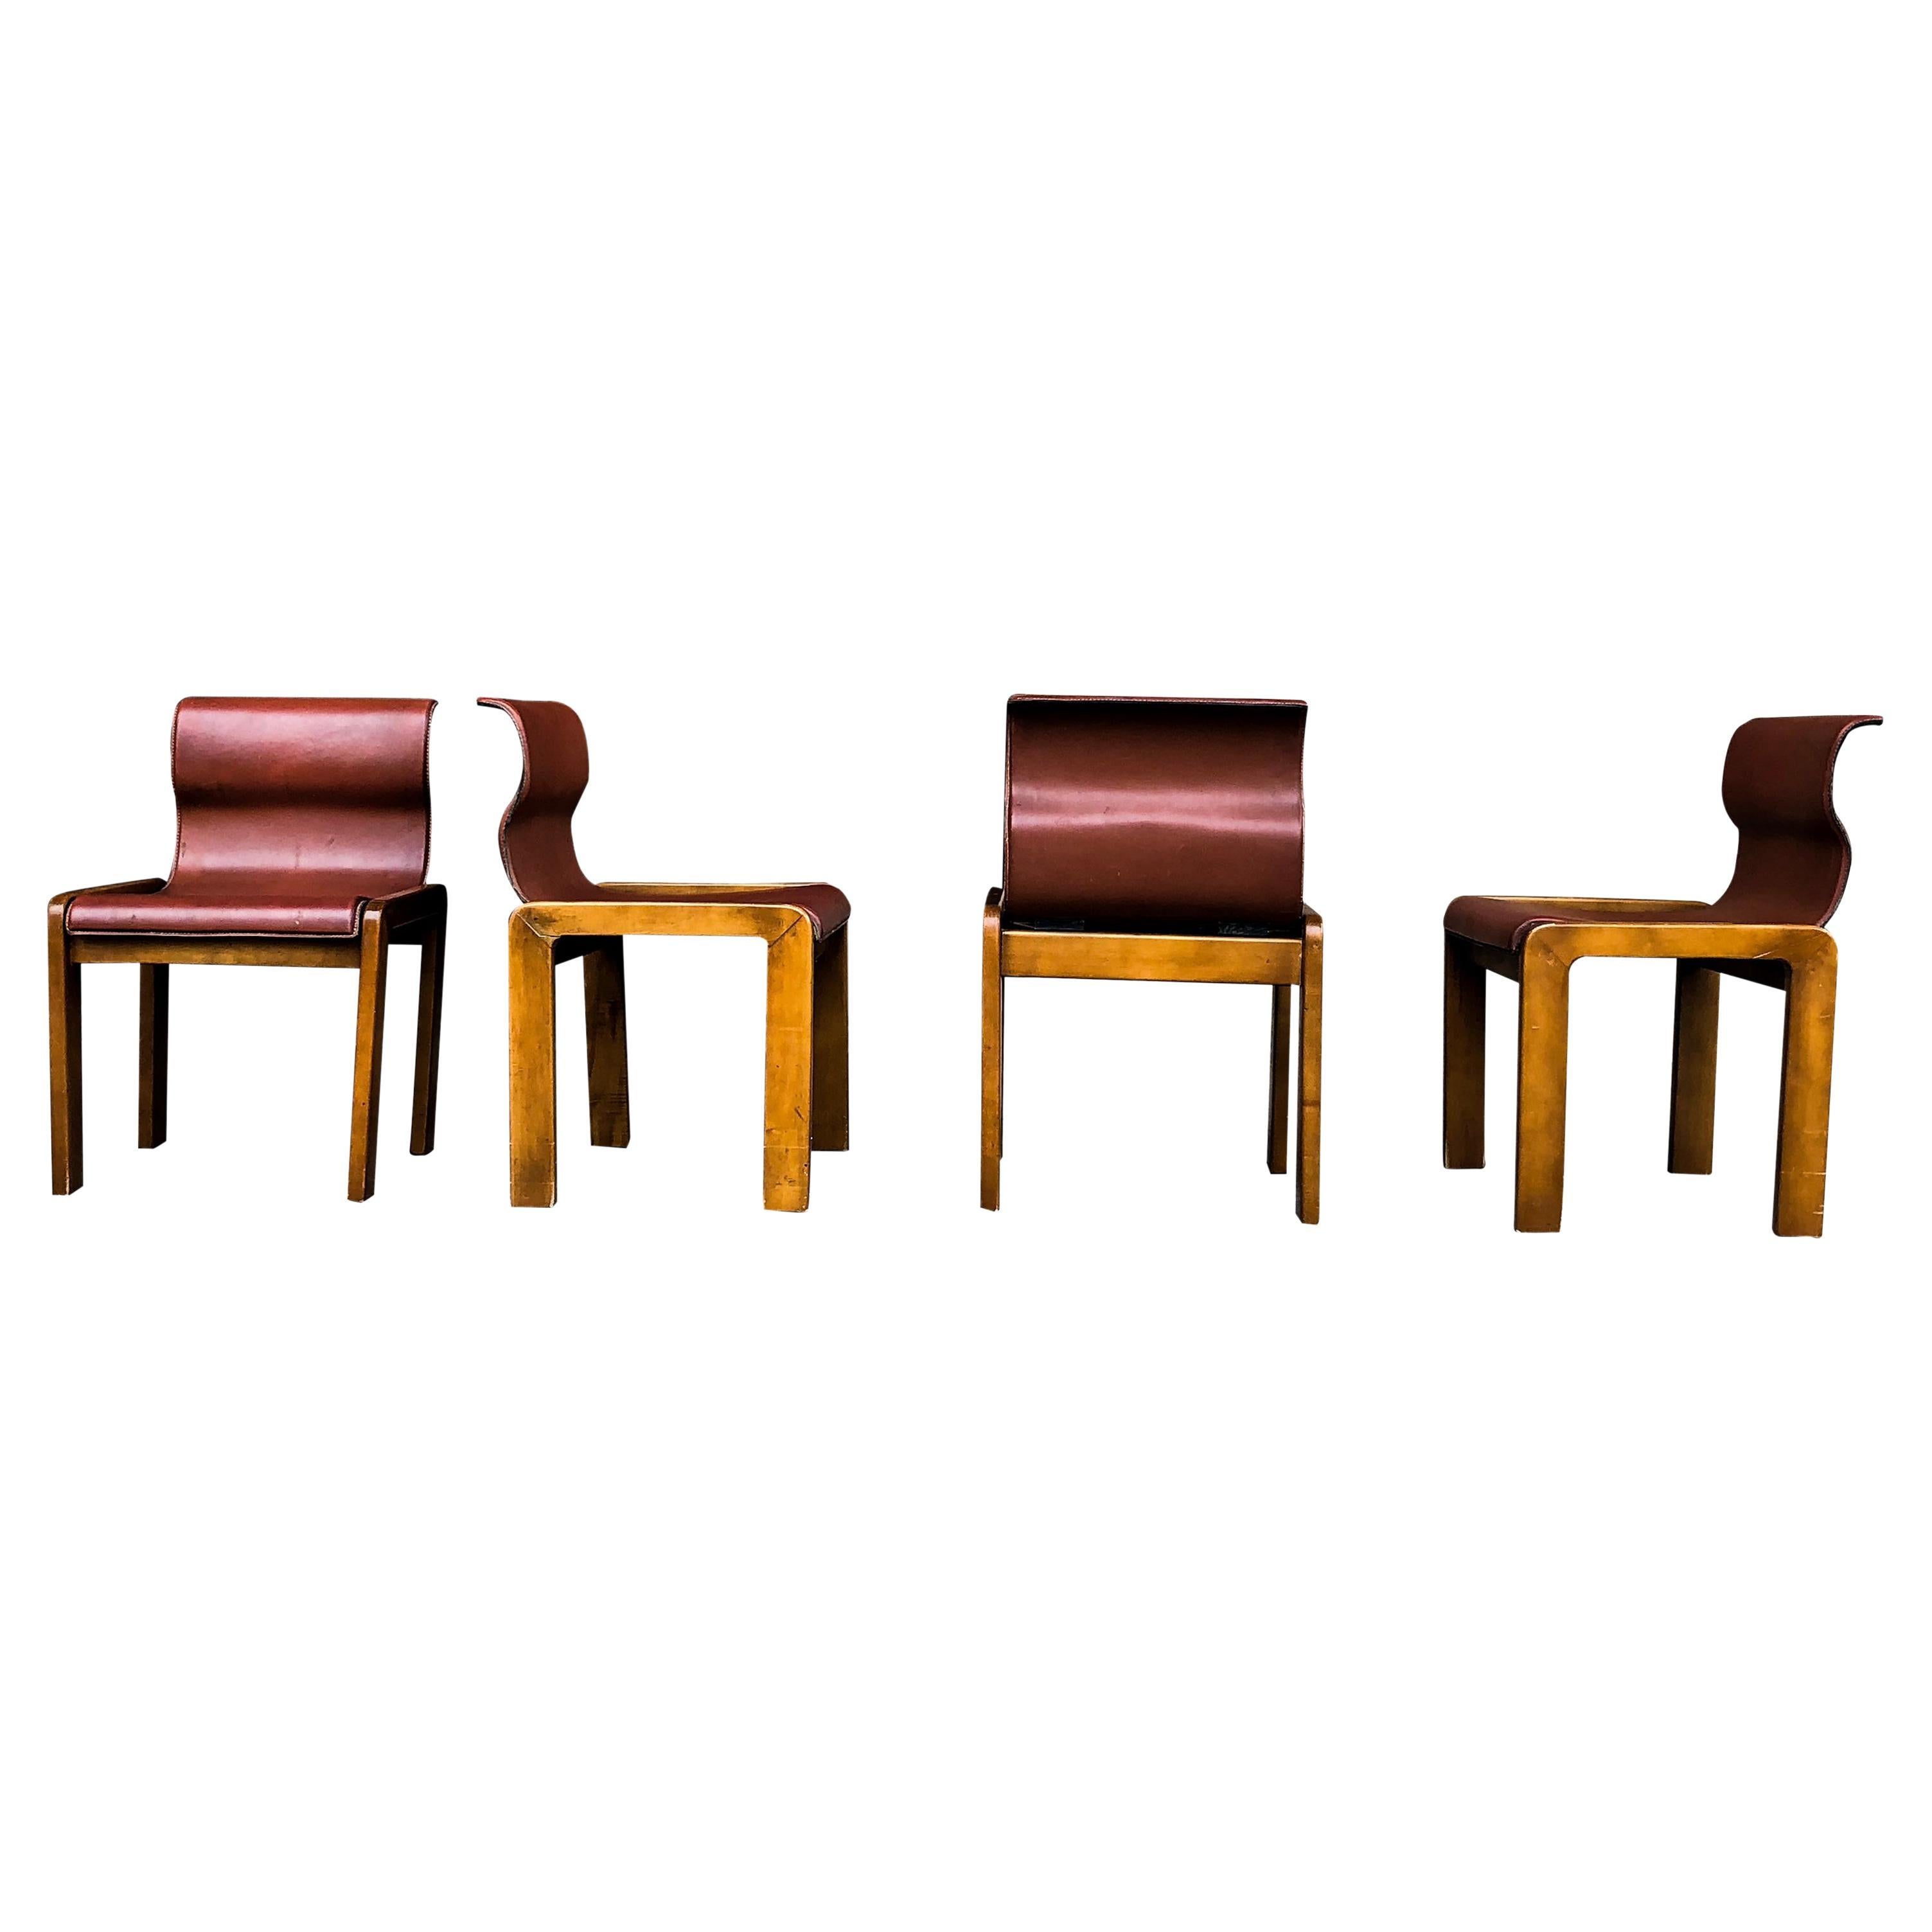 Afra & Tobia Scarpa Midcentury Leather and Plywood Dining Chair, 1966, Set of 4